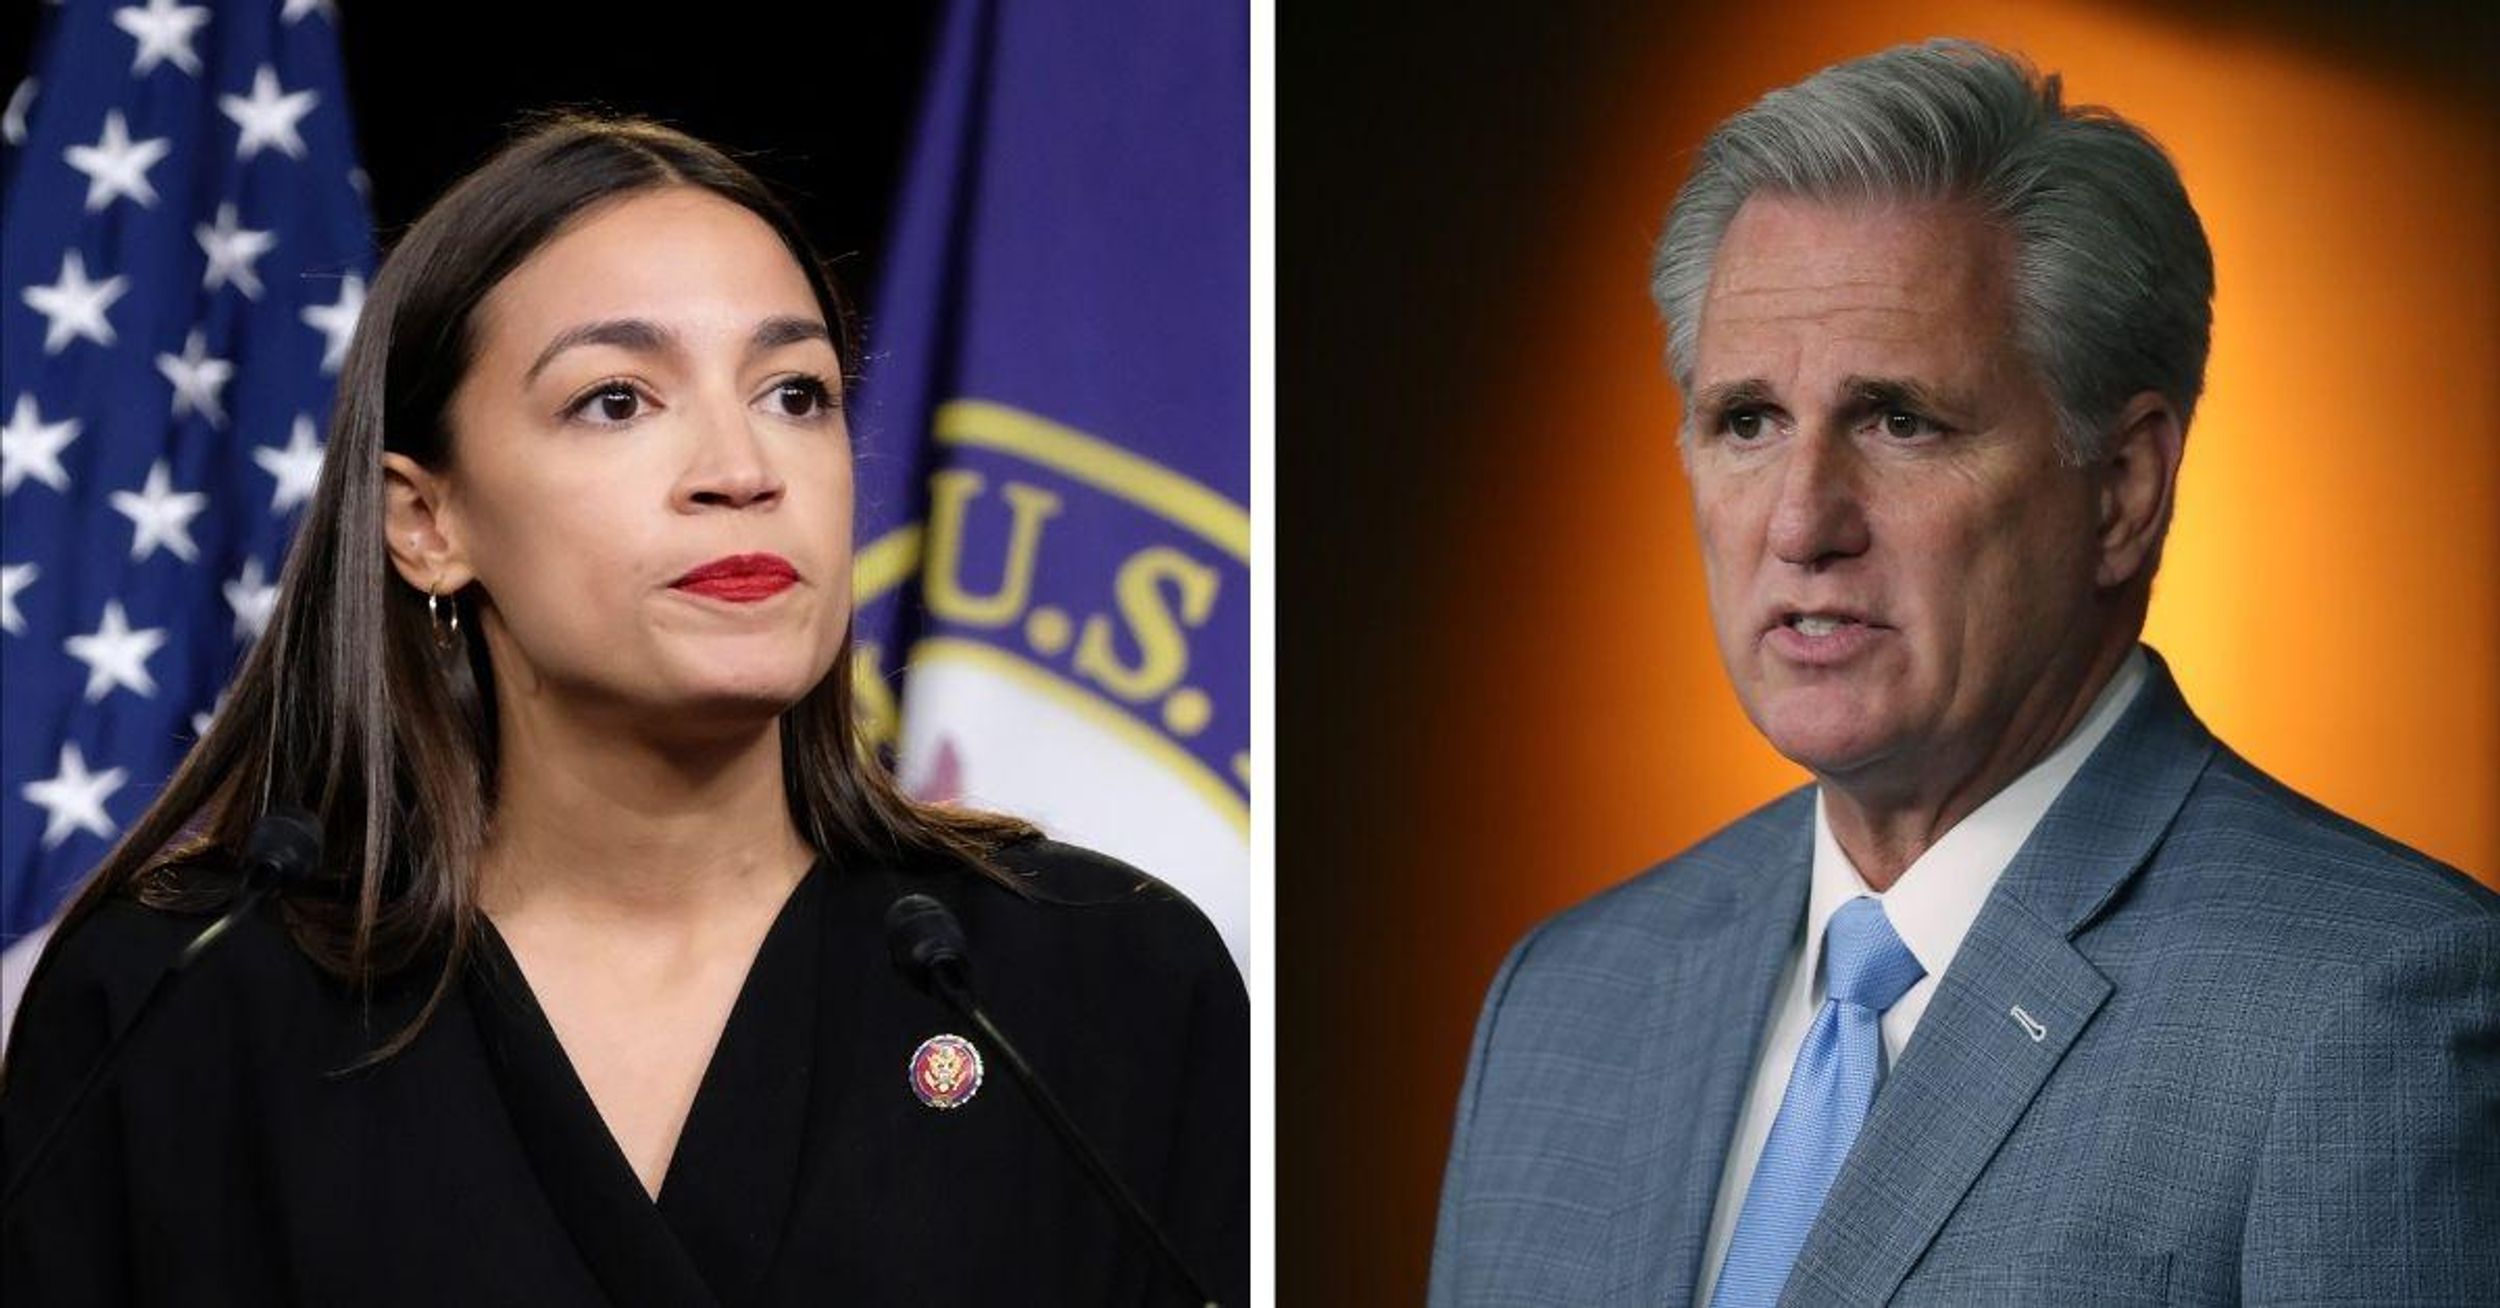 AOC Blasts GOP House Leader For Letting 'Legitimate White Supremacist Sympathizers' Run Party